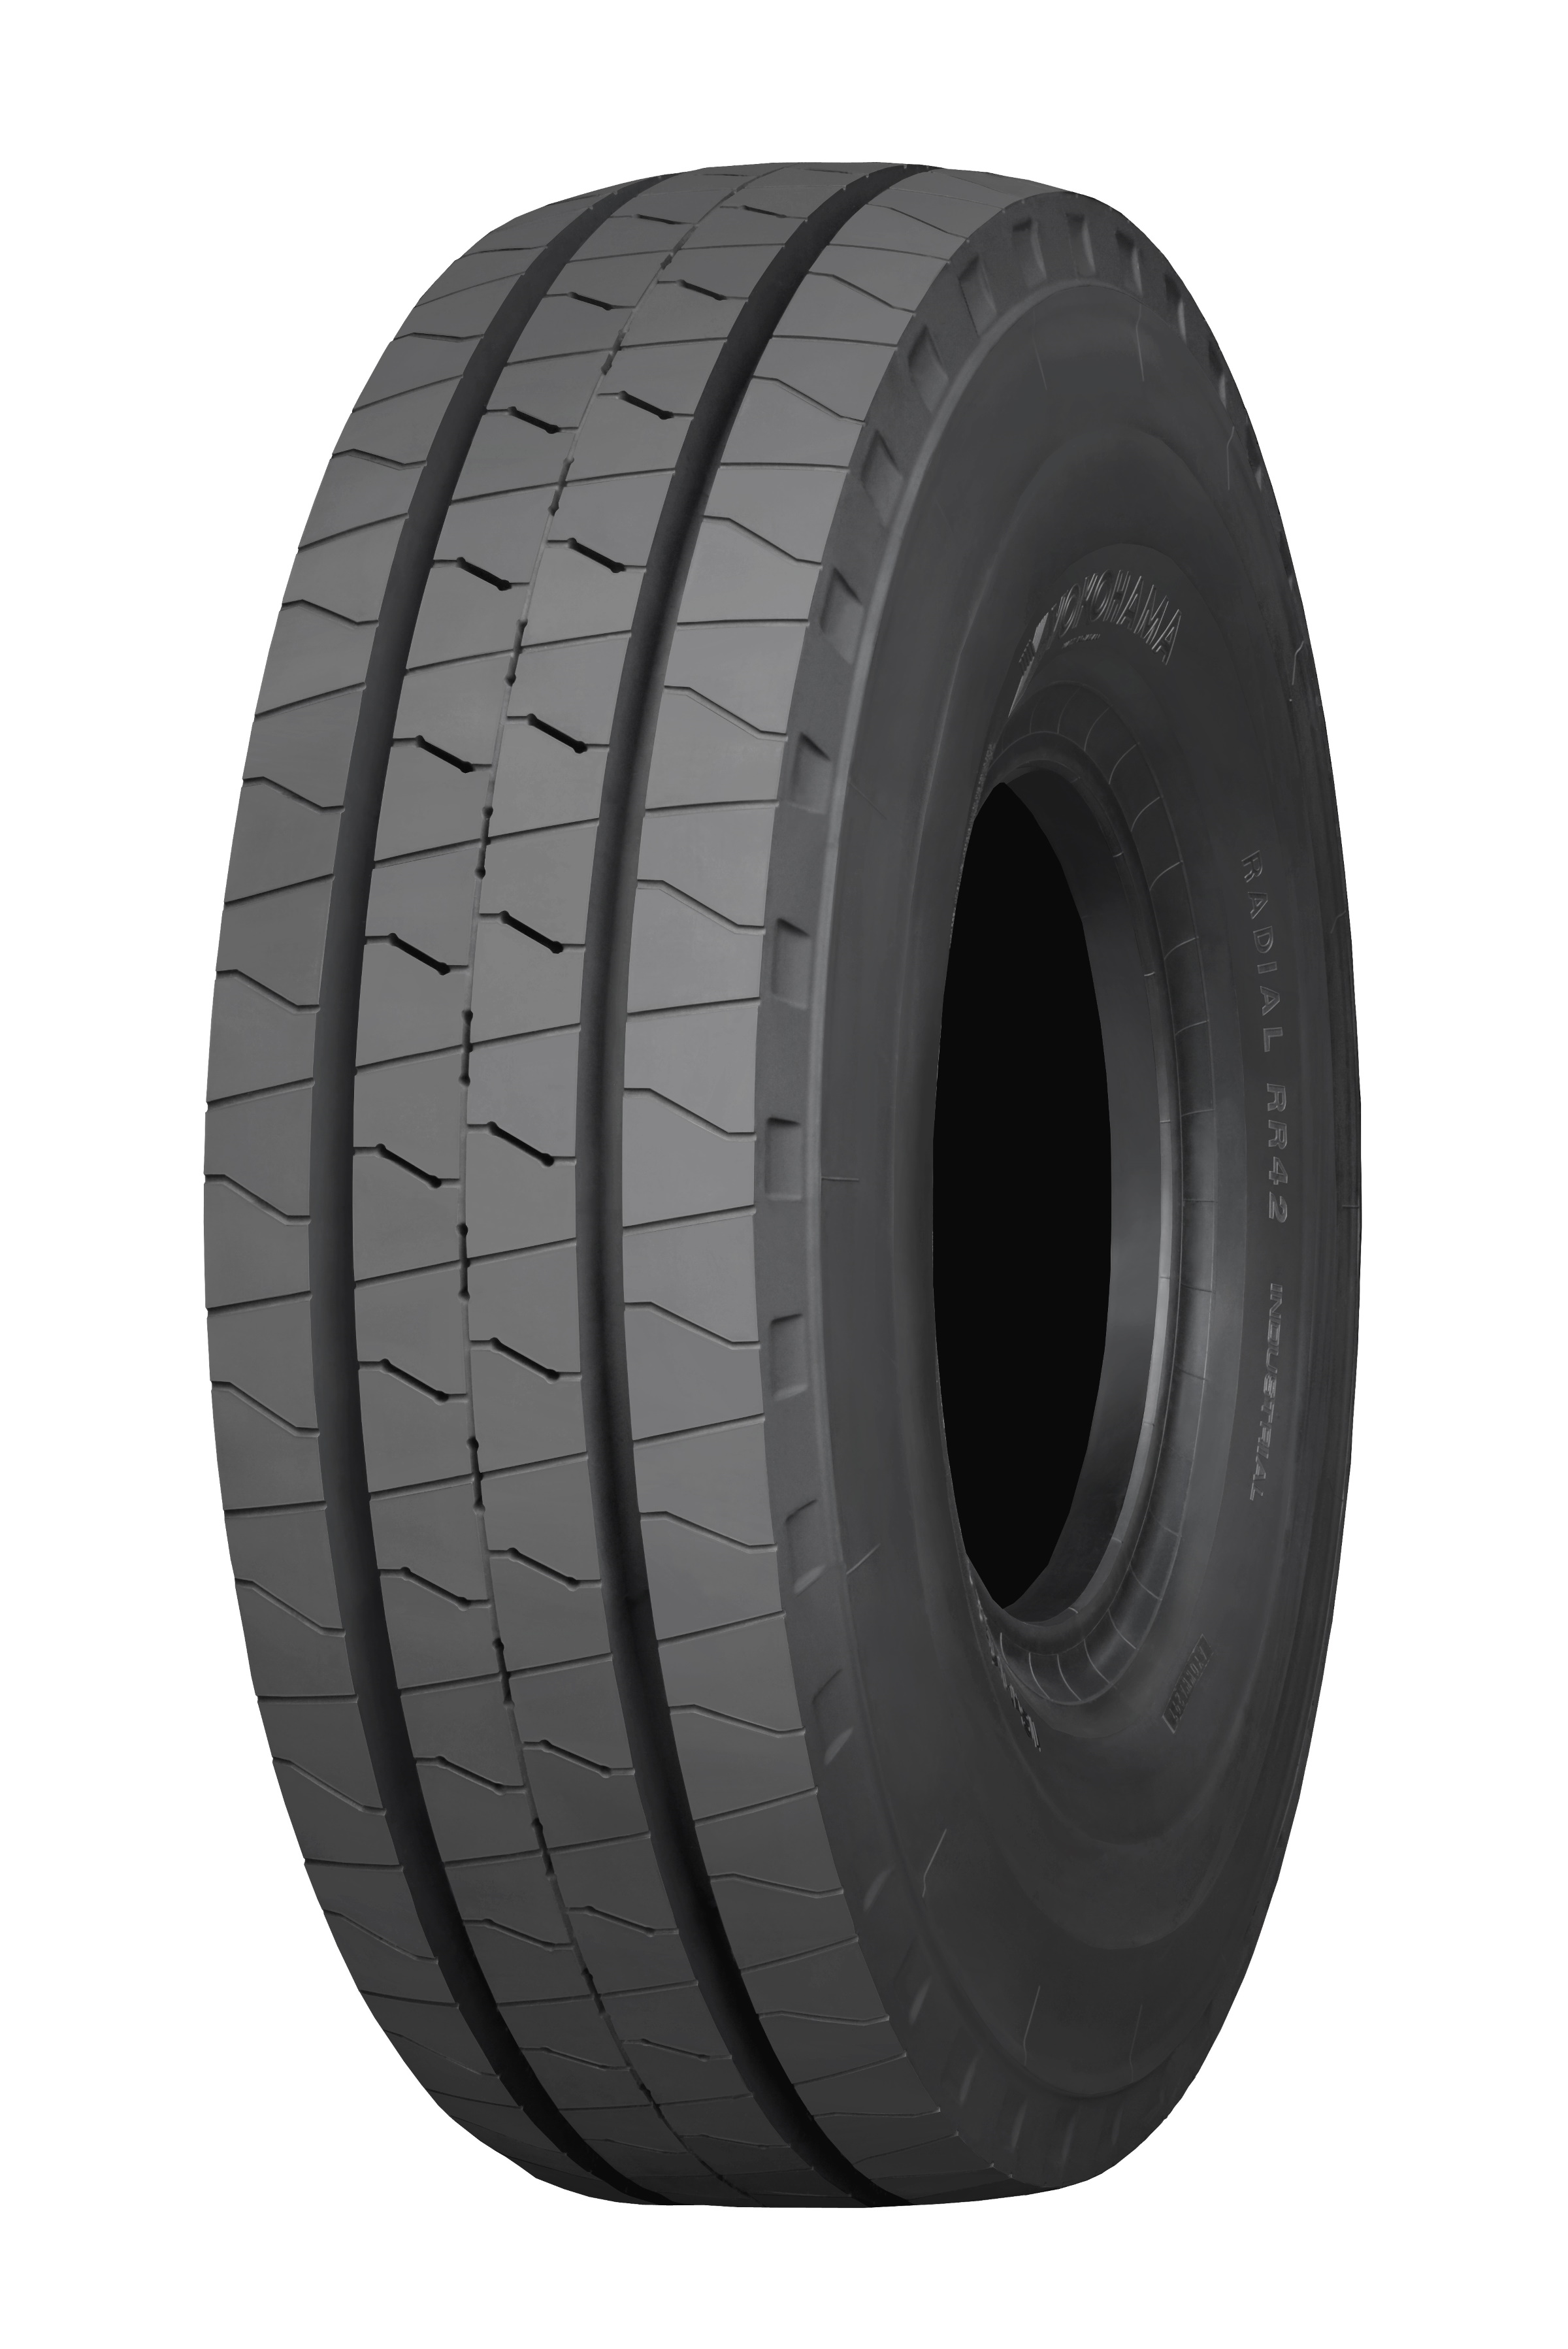 Yokohama Tire Launches New RR42™ Radial Tire for IND-4 Straddle Carriers